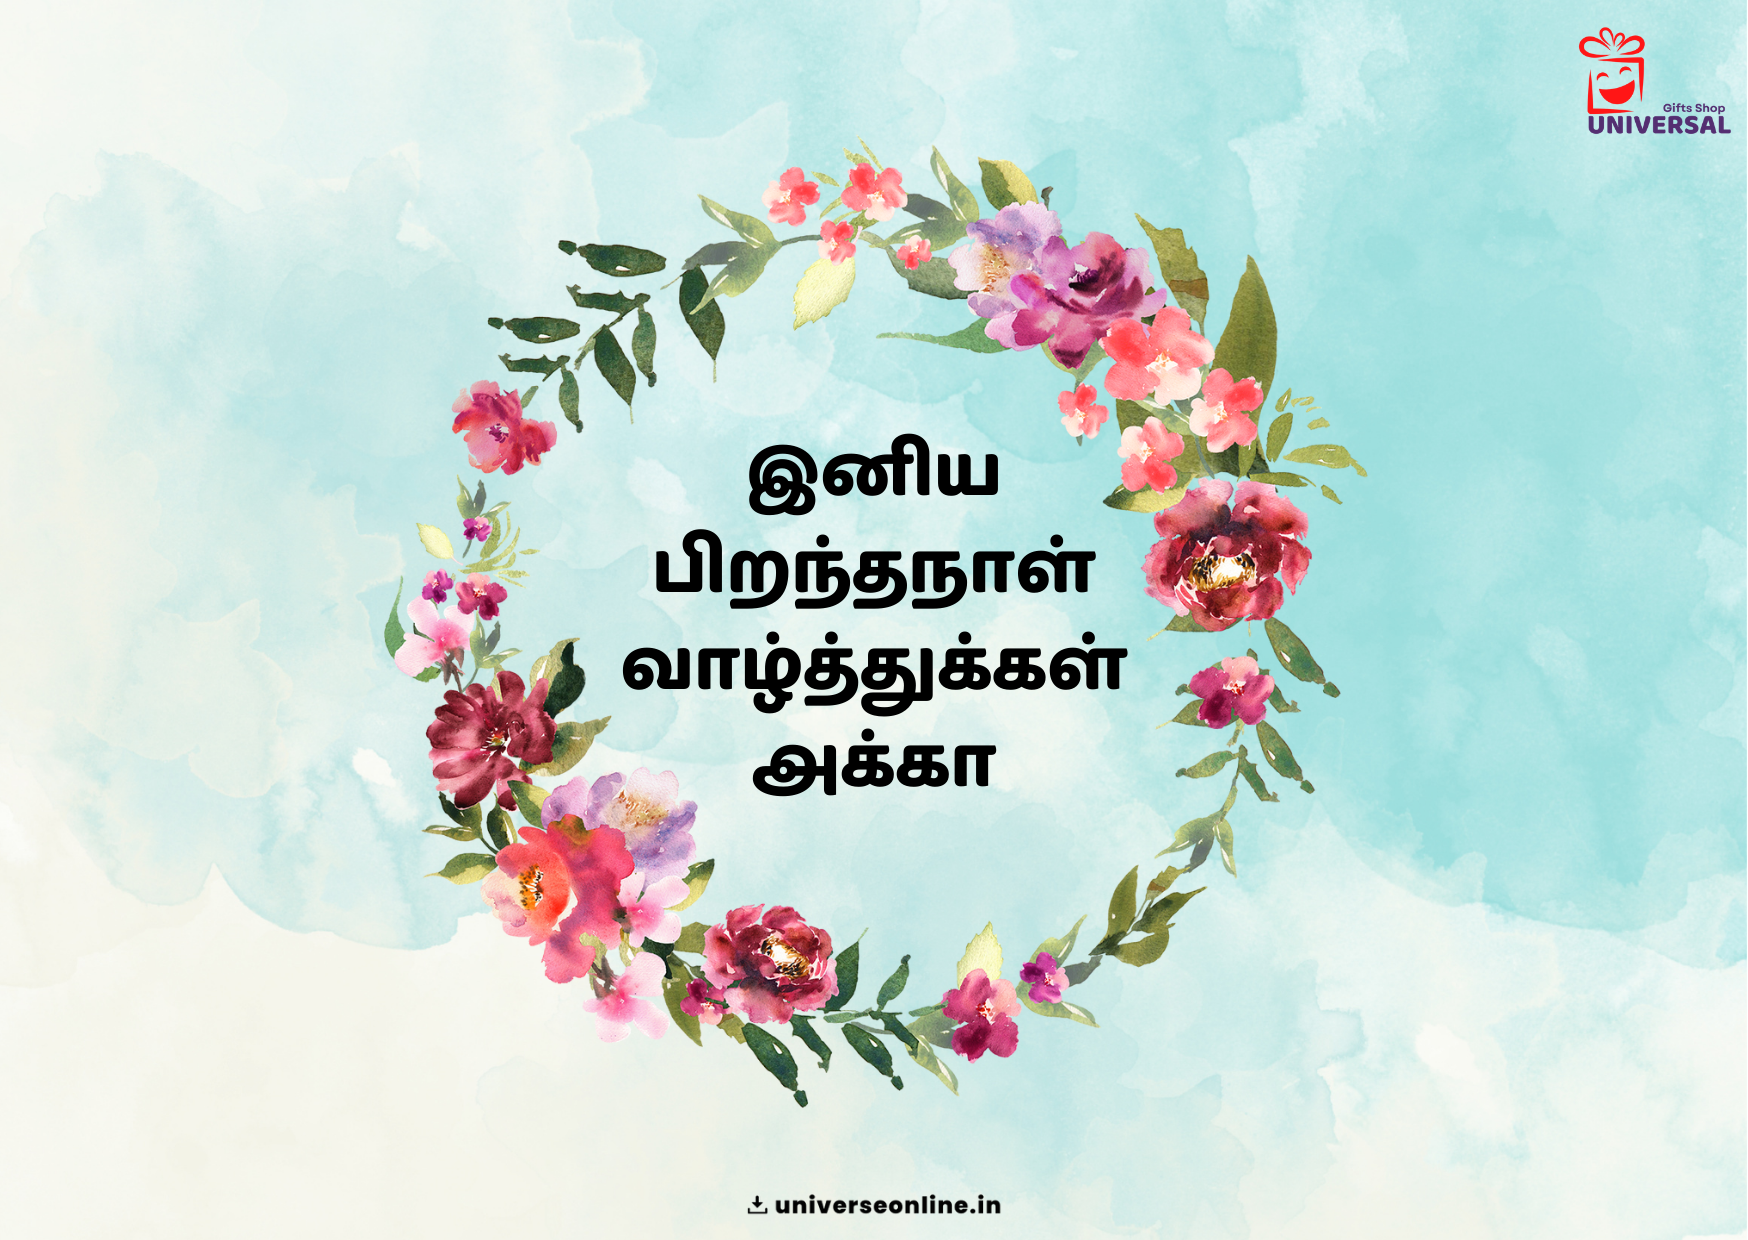 happy birthday wishes in tamil words